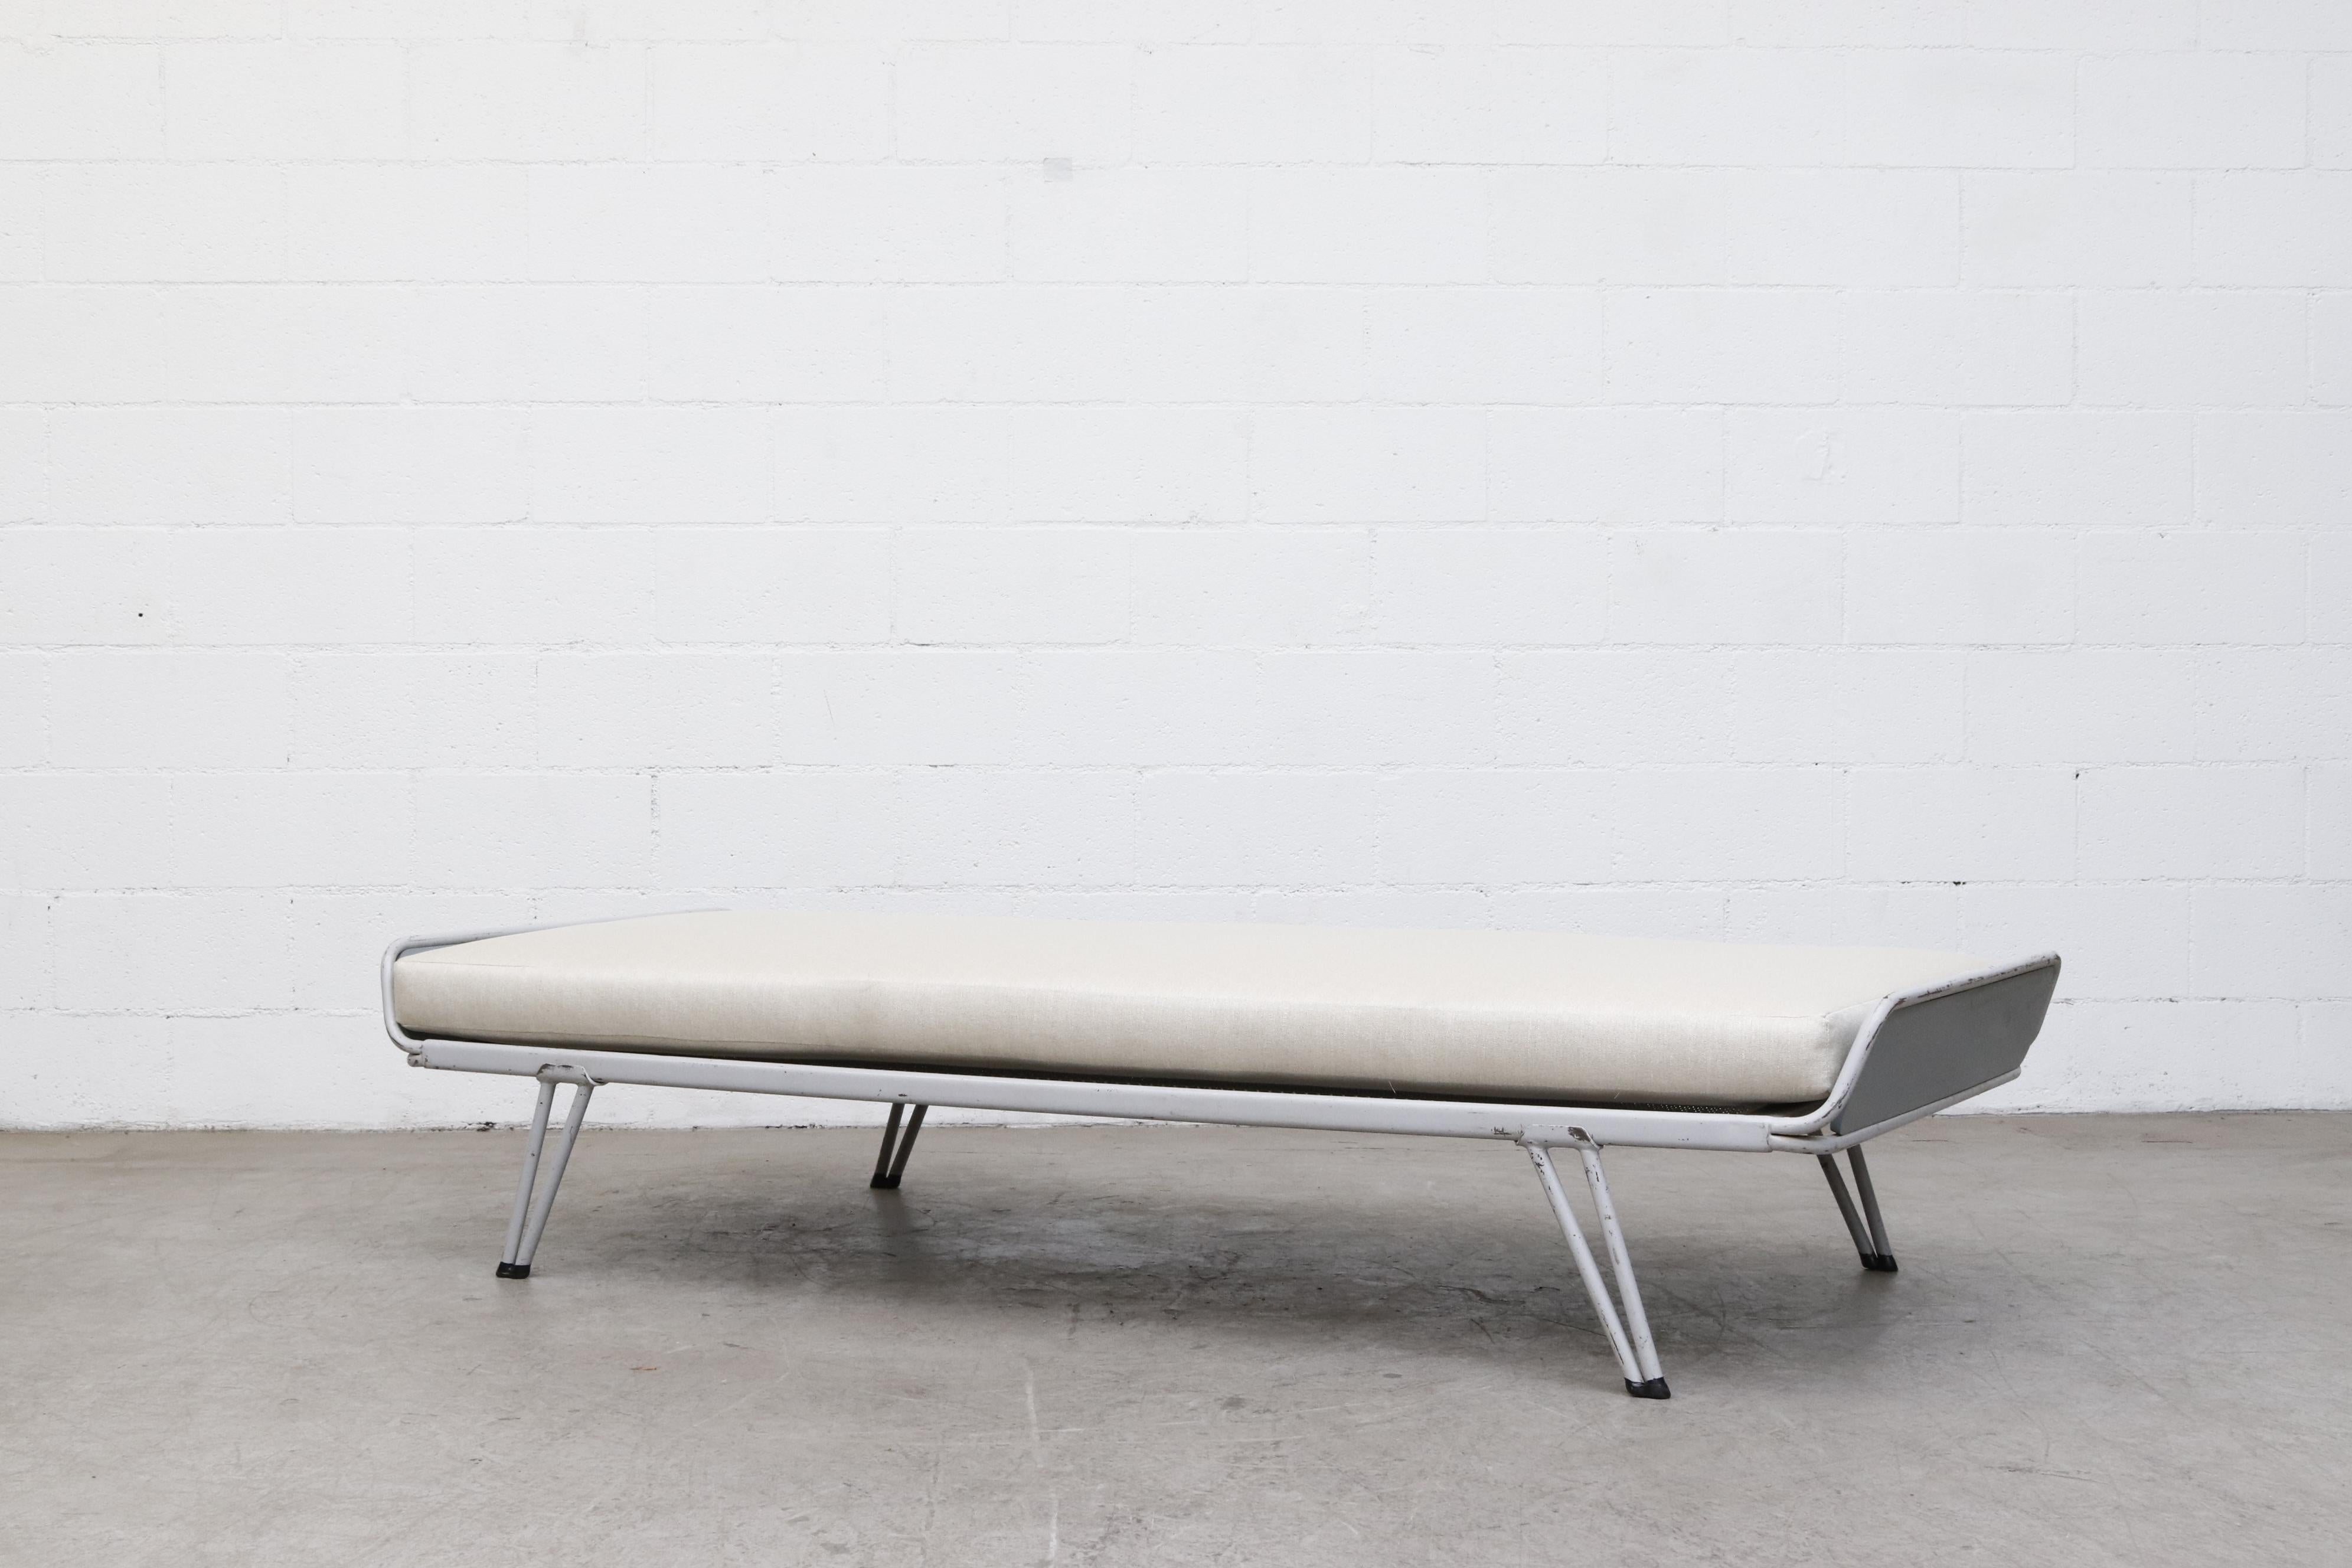 Newly upholstered industrial daybed by A.R. Cordemeyer for 'Auping'. Off-white mattress on a light grey enameled metal frame with signature 'Auping' Mesh support. In original condition with grey stained wood accents and visible frame wear and